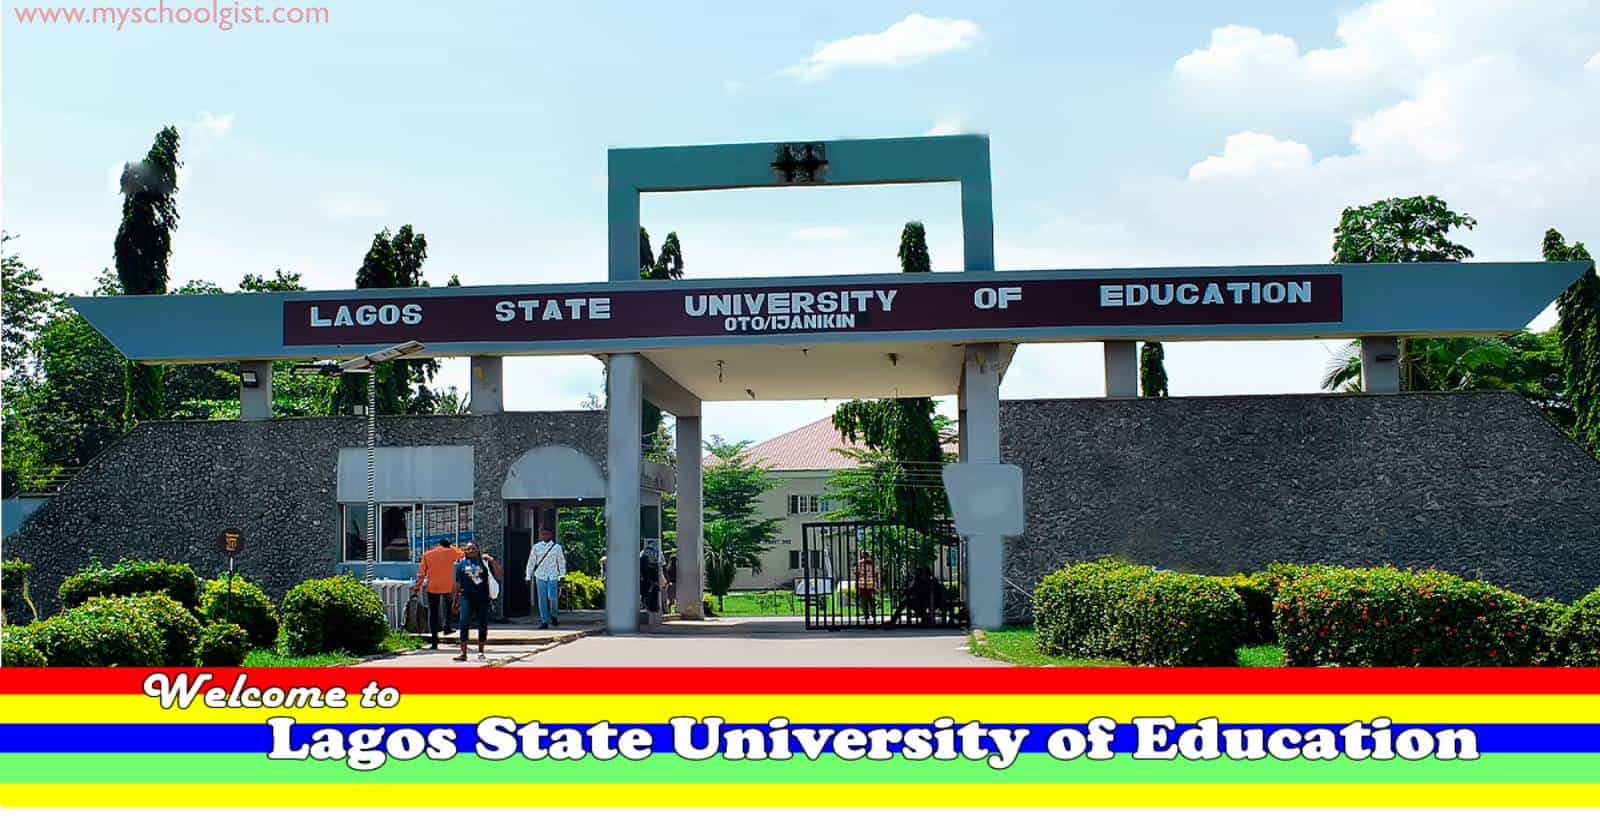 Lagos State University of Education Admission Cut-Off Mark